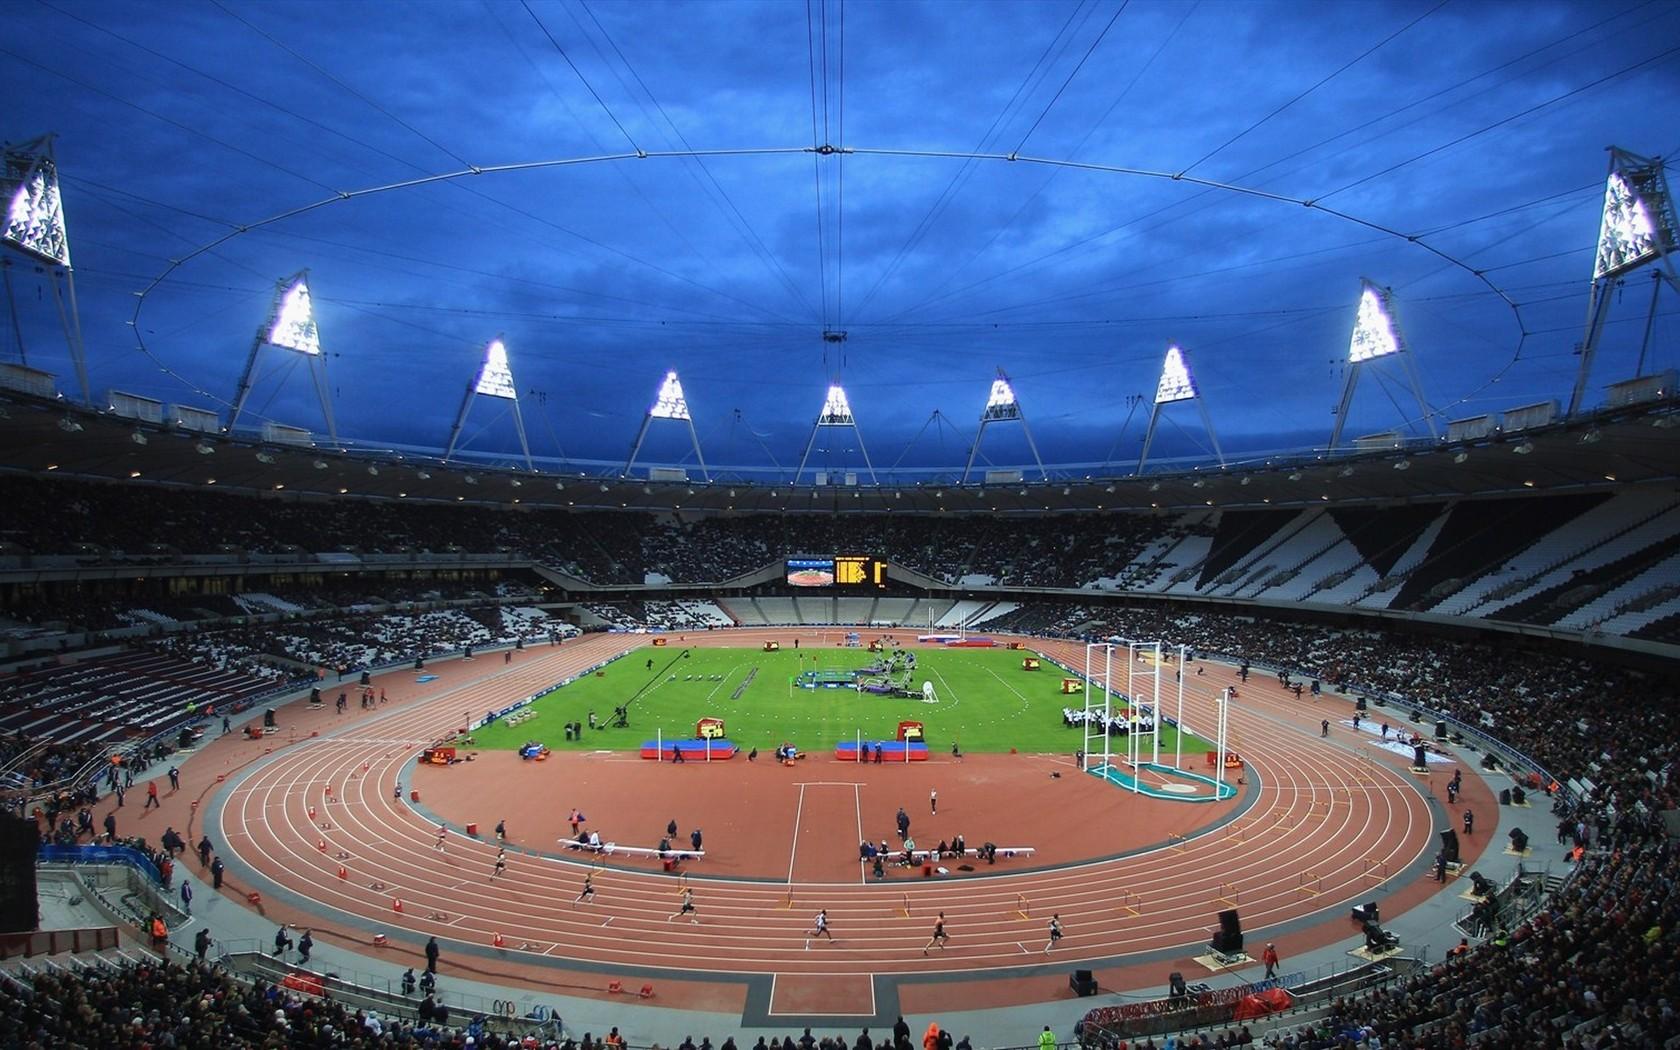 Download Wallpaper Stadium Track And Field Audience London Free